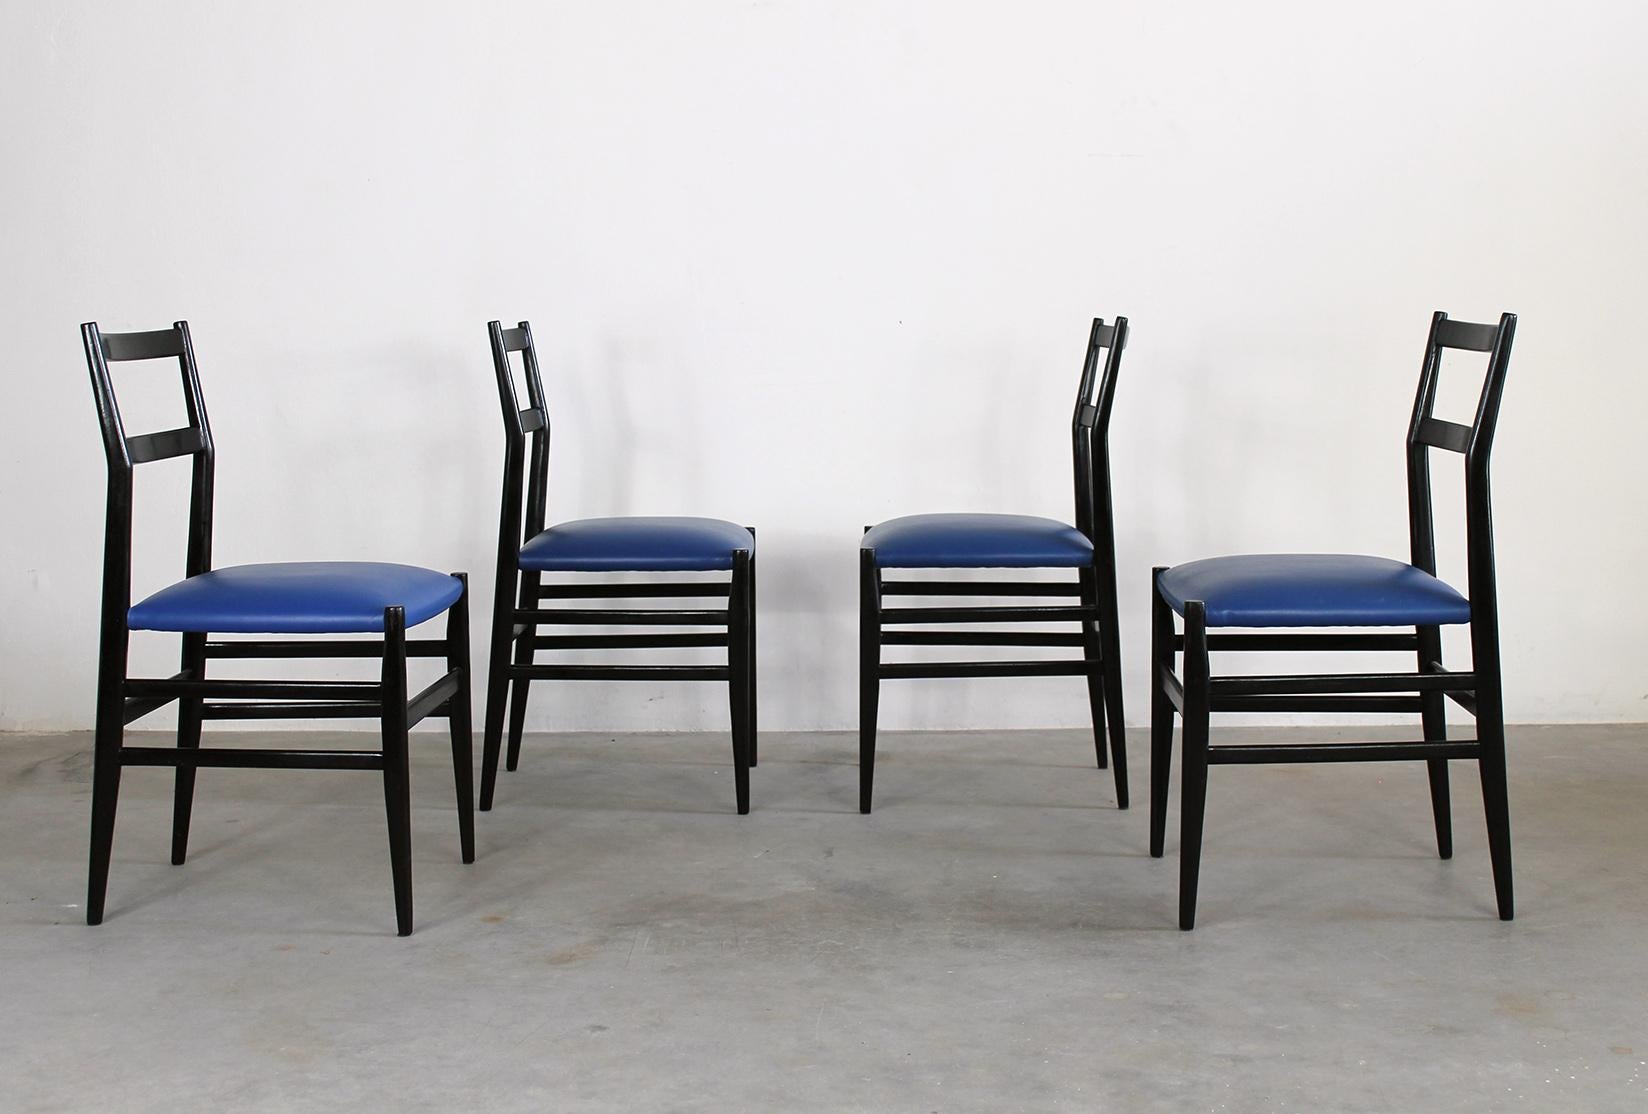 Mid-20th Century Gio Ponti Set of Four Leggera Dining Chairs by Cassina 1951 Italy For Sale